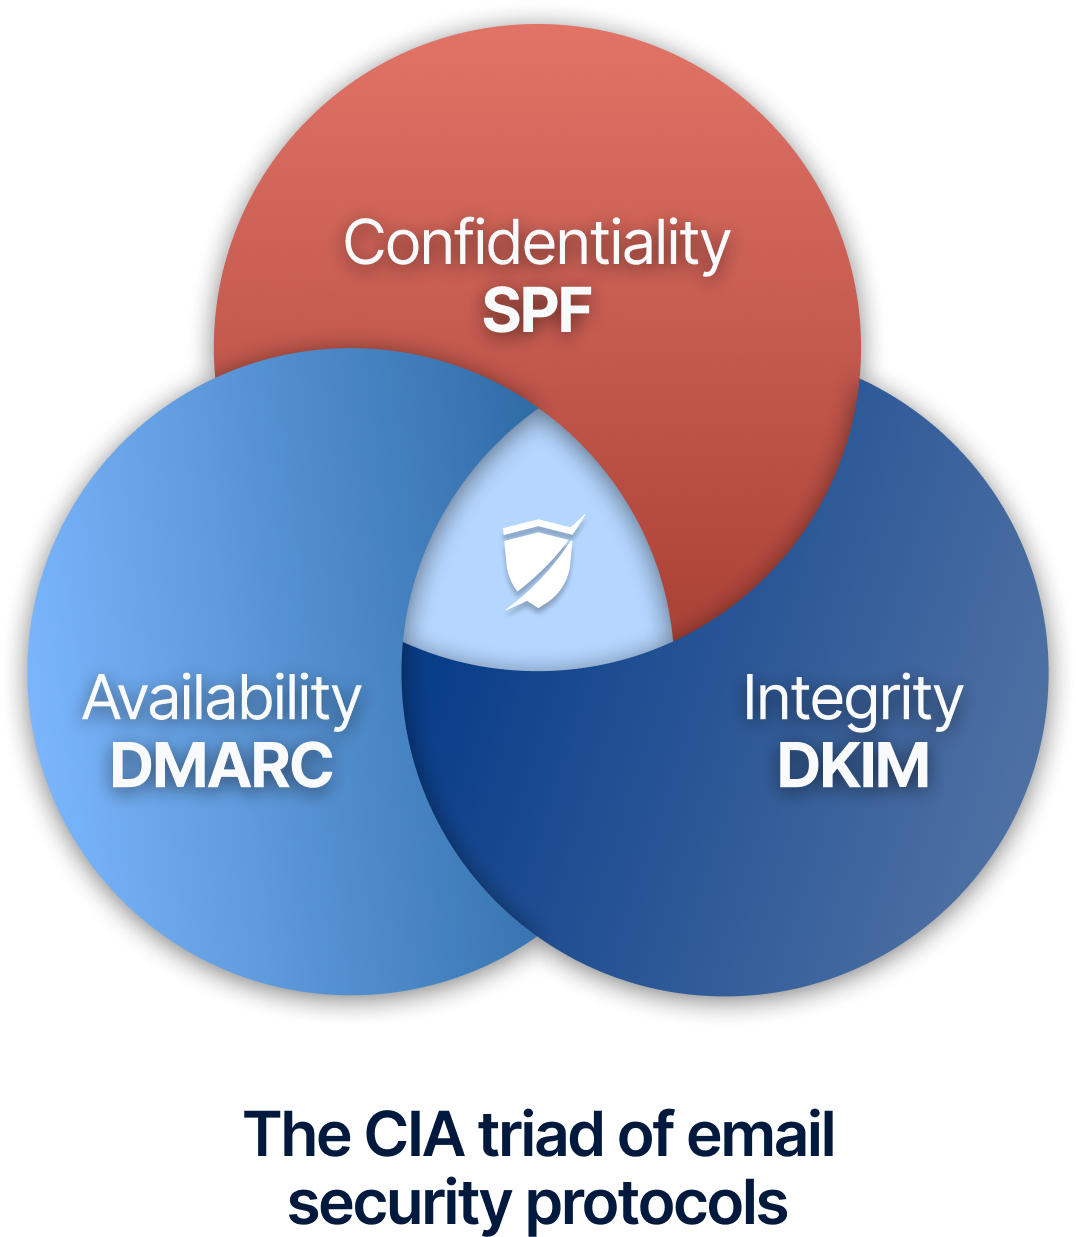 The CIA triad of email security protocols